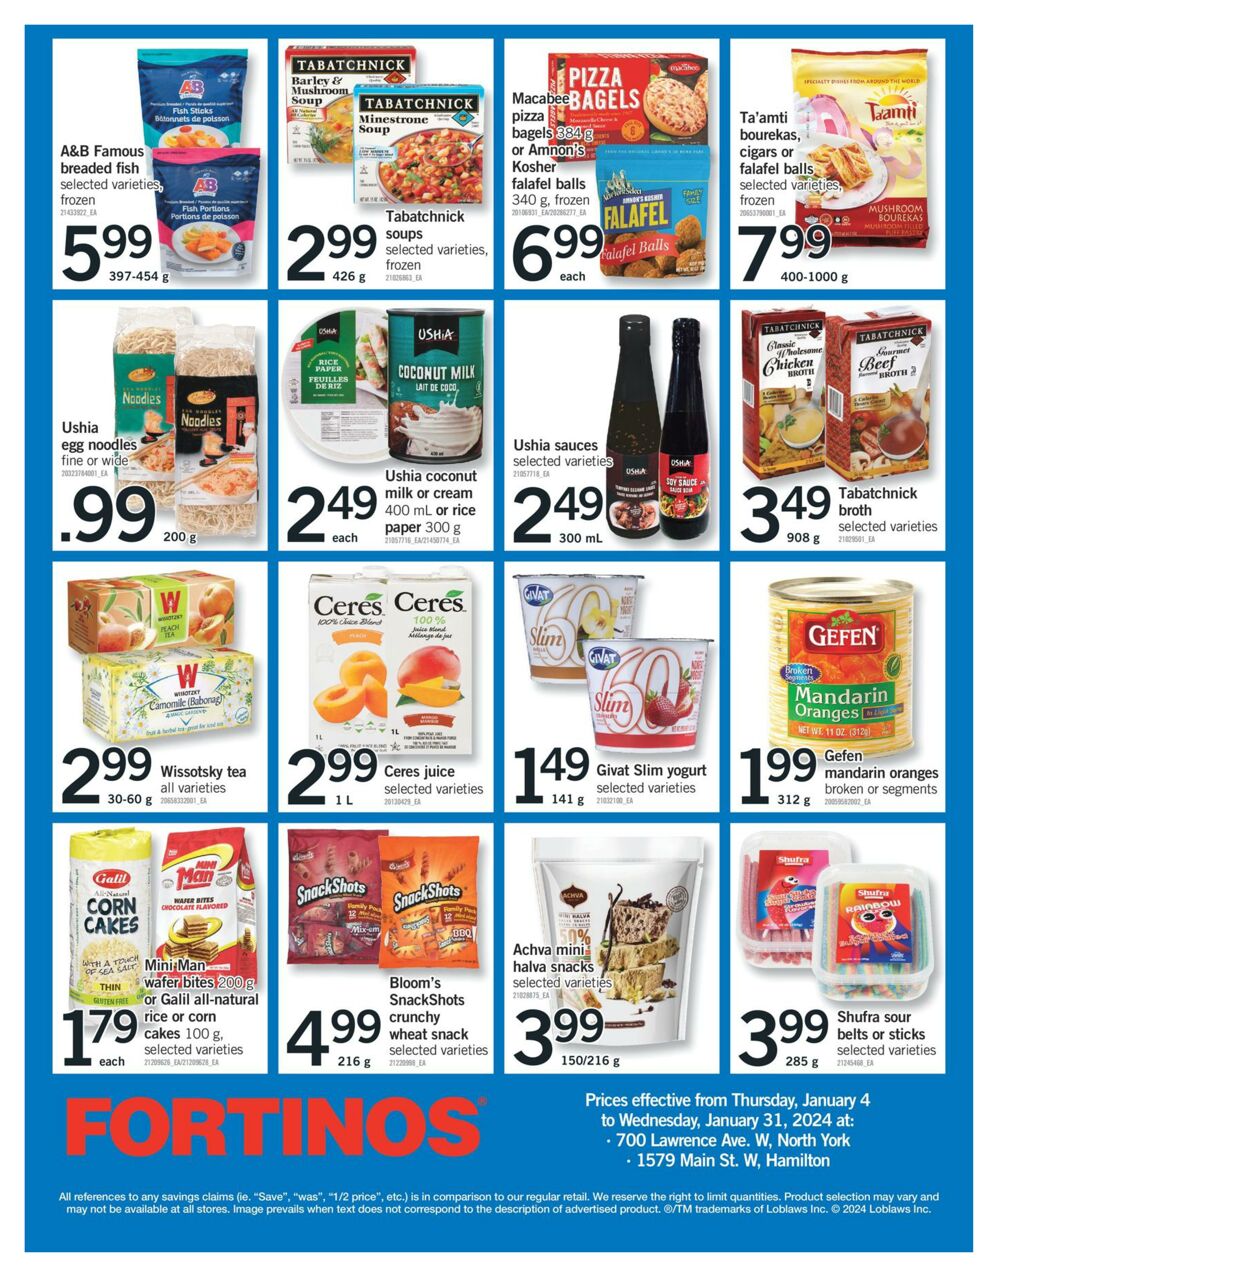 Fortinos Flyer from 01/25/2024